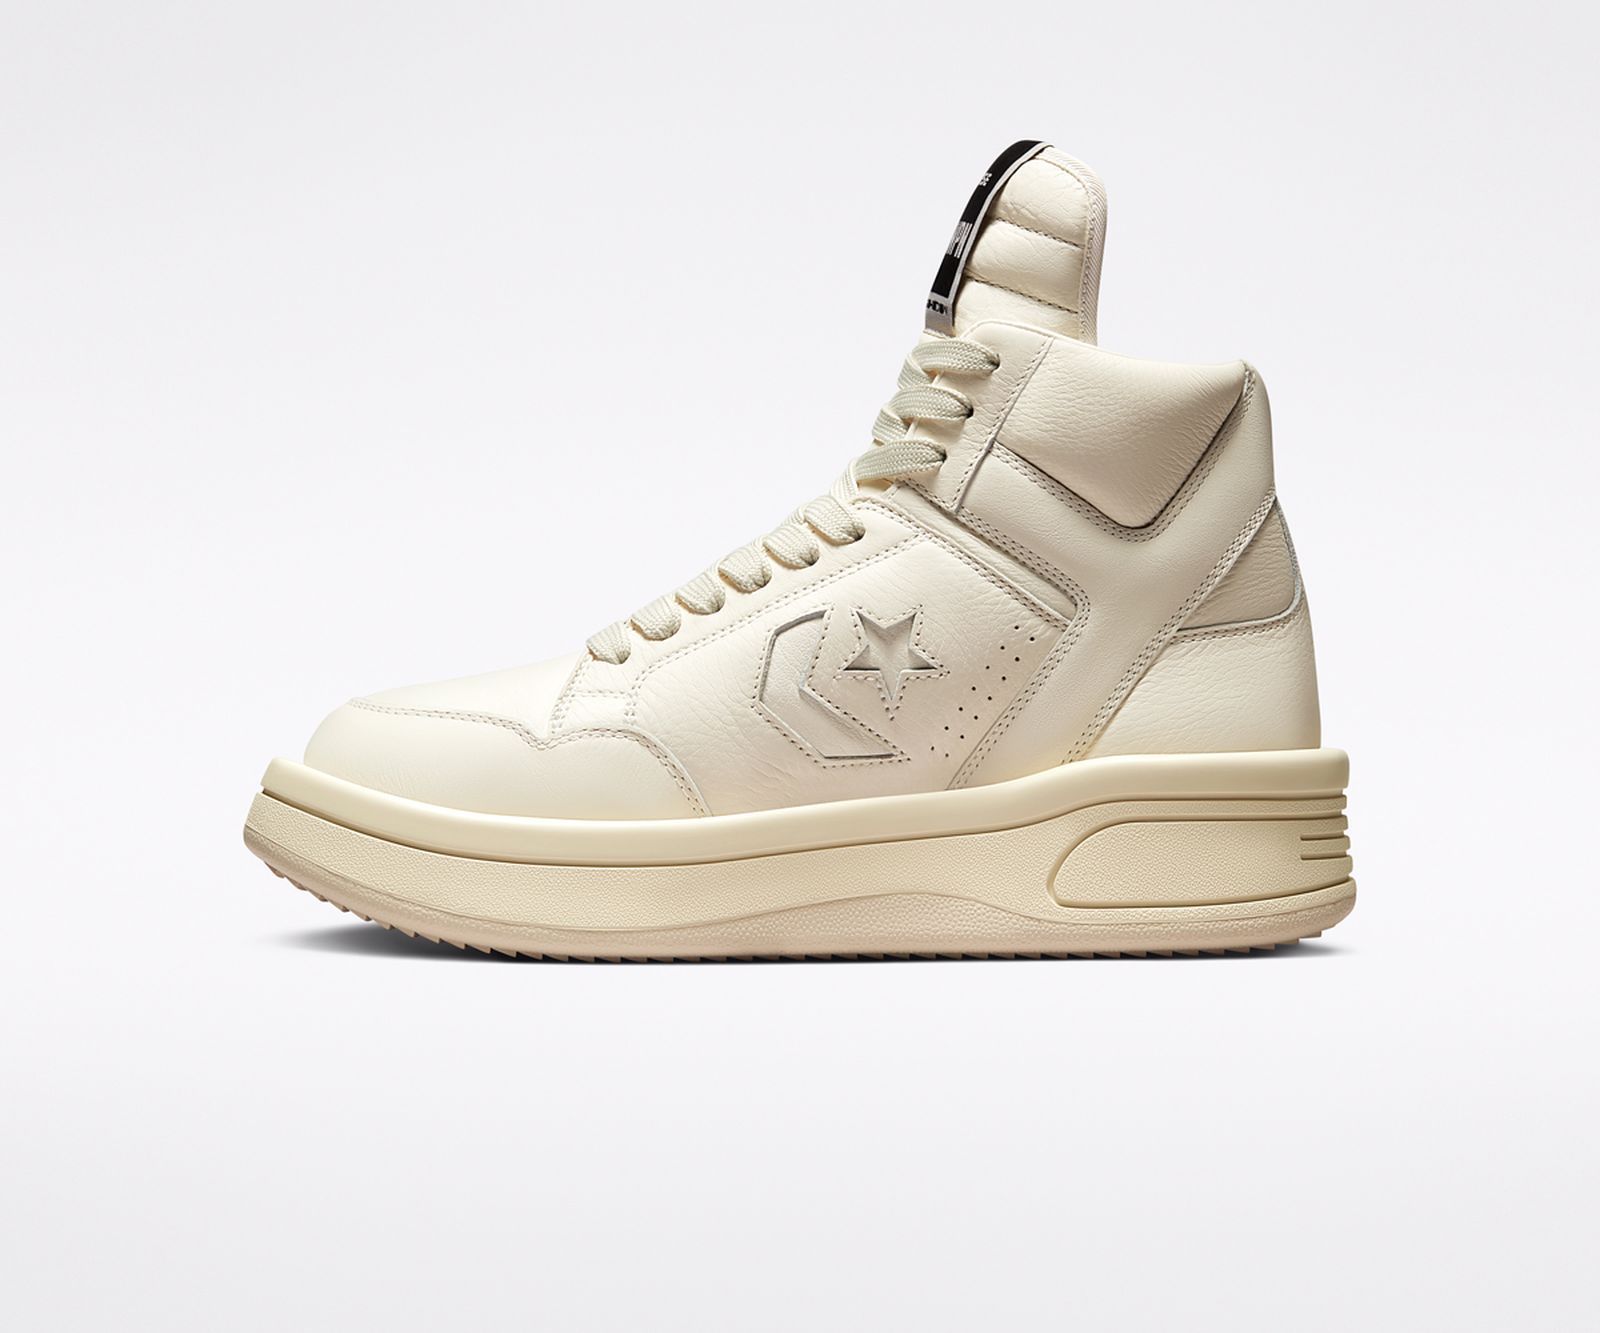 rick-owens-converse-turbowpn-release-date-price-22